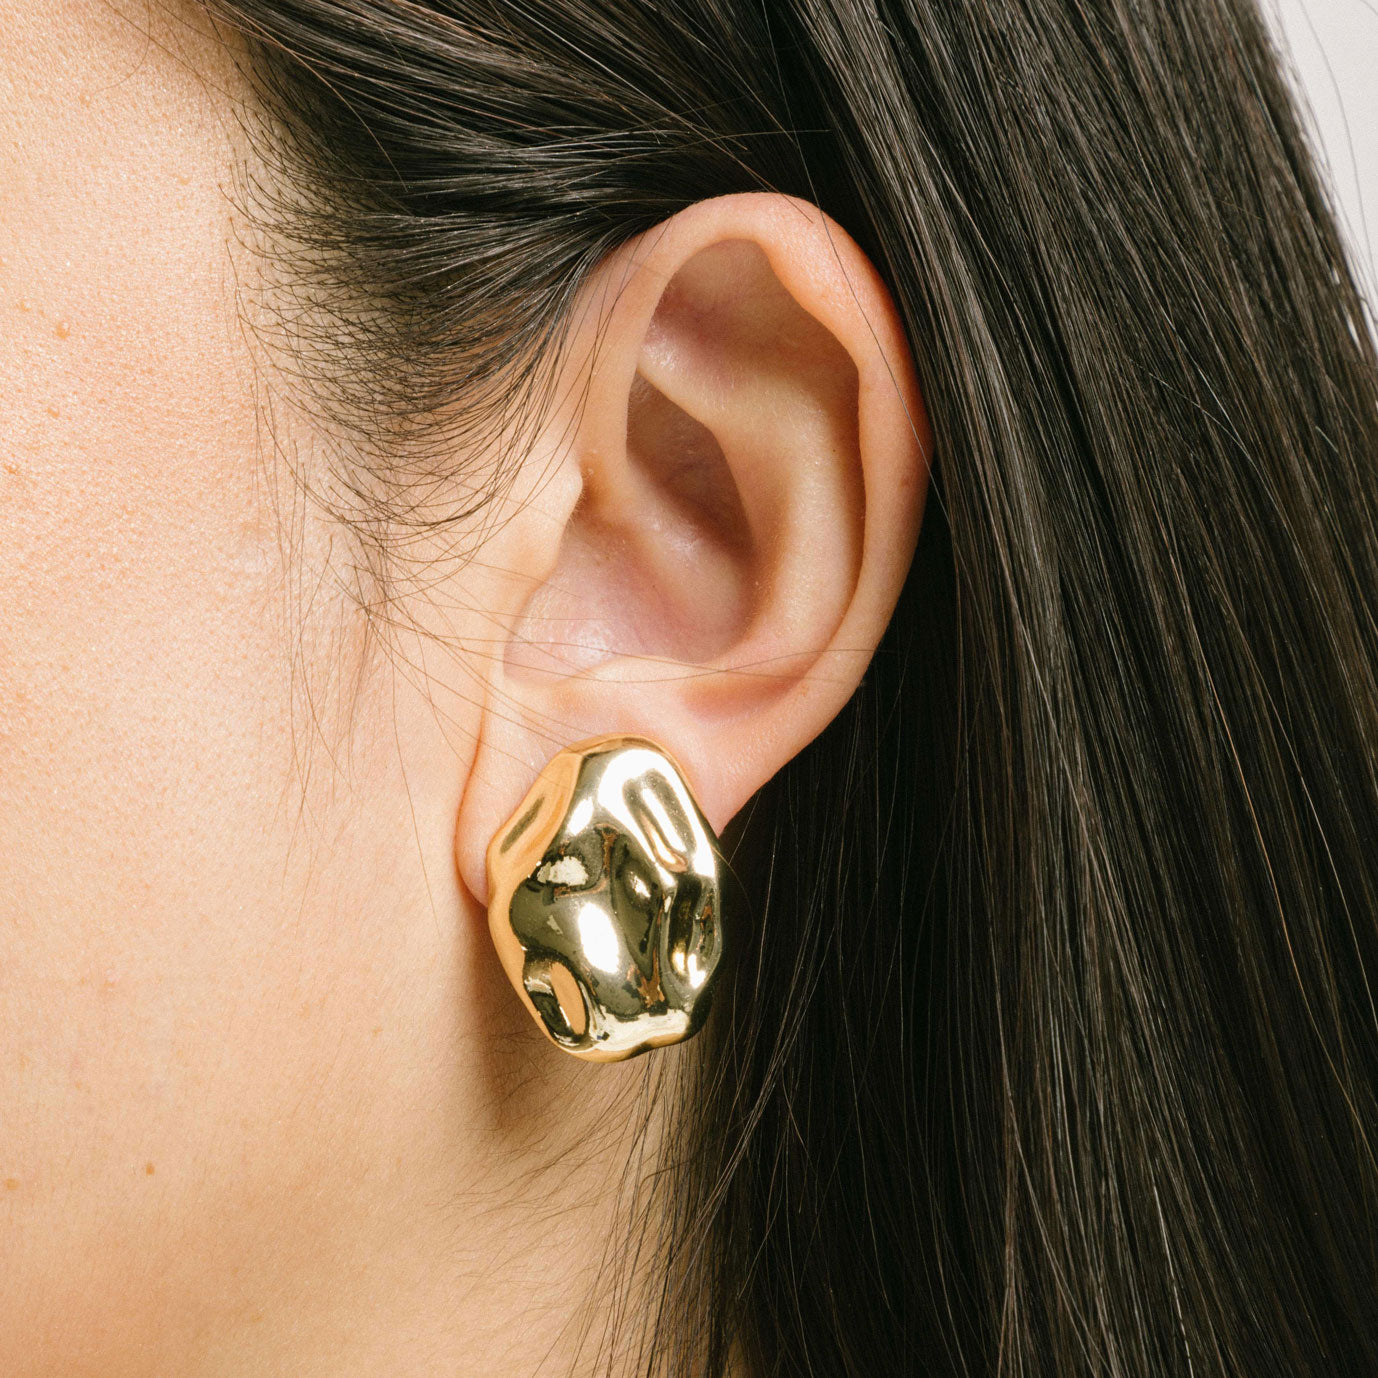 A model wearing the Amaya Clip On Earrings in Gold feature a secure padded clip-on closure type, making them suitable for all ear types.The average comfortable wear duration is 8-12 hours, and the Copper Alloy construction ensures a reliable and secure hold. The item is sold as one pair; adjustable rubber padding is included.